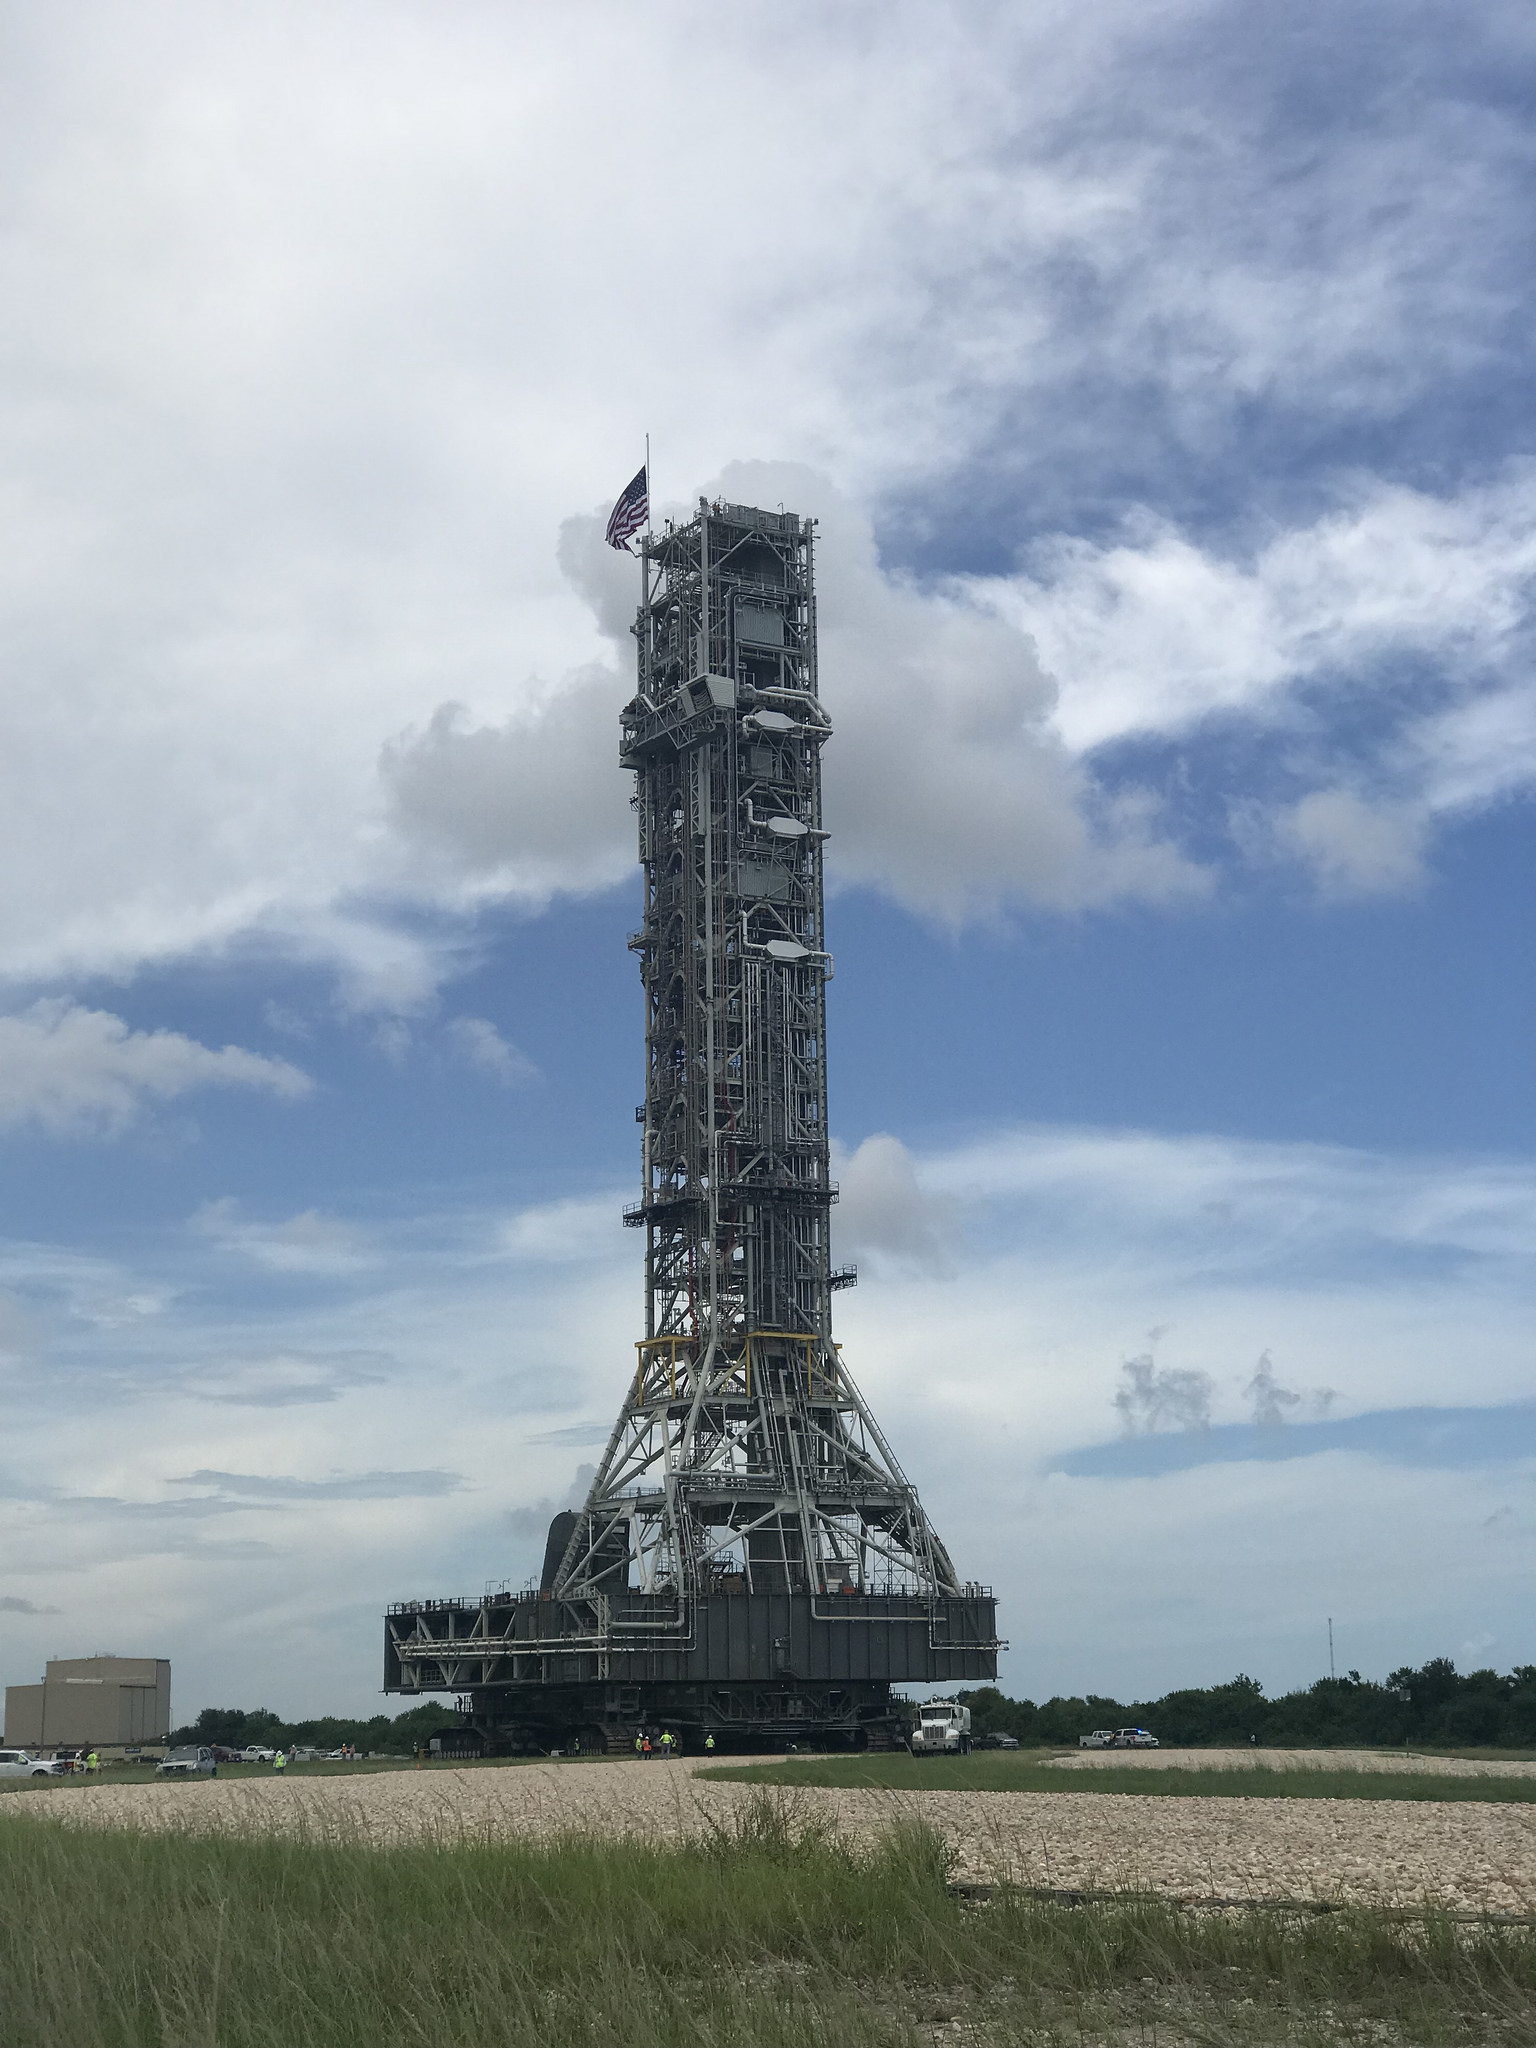 NASA's mobile launcher atop crawler-transporter 2 begins its trek to Launch Pad 39B on Aug. 30, 2018, at Kennedy Space Center.